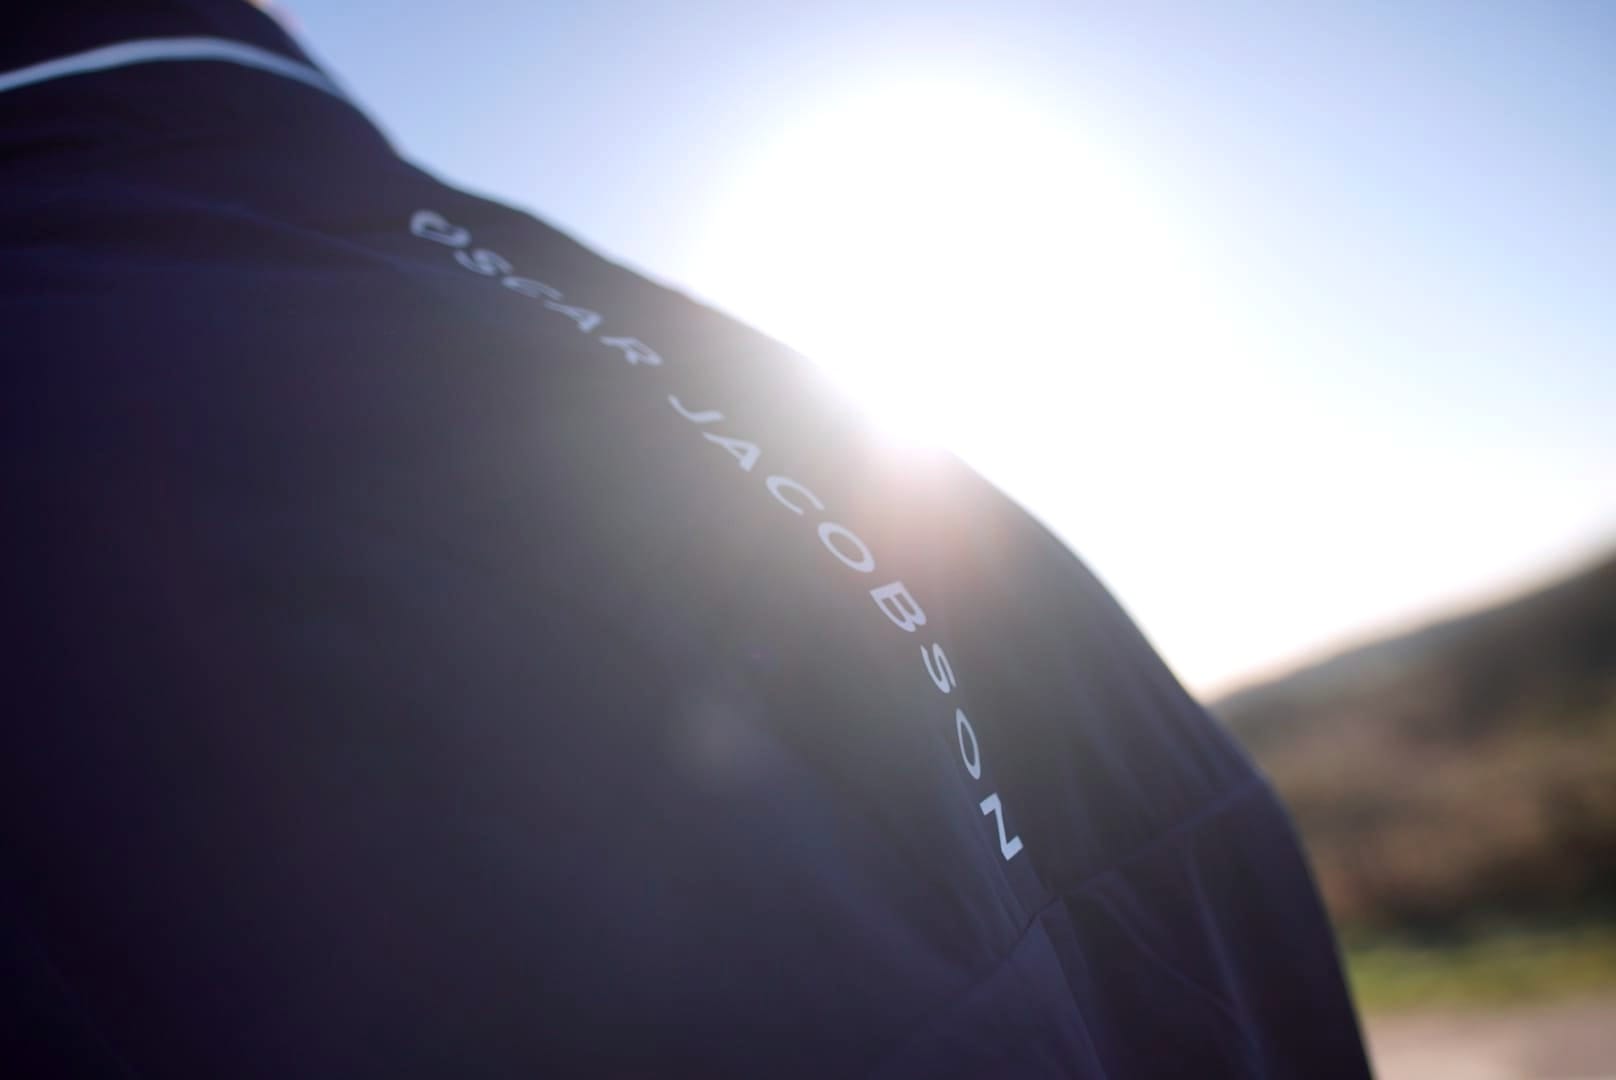 Image shows the Oscar Jacobson logo on the back of the Laguna jacket with the sun blooming in the bckground.